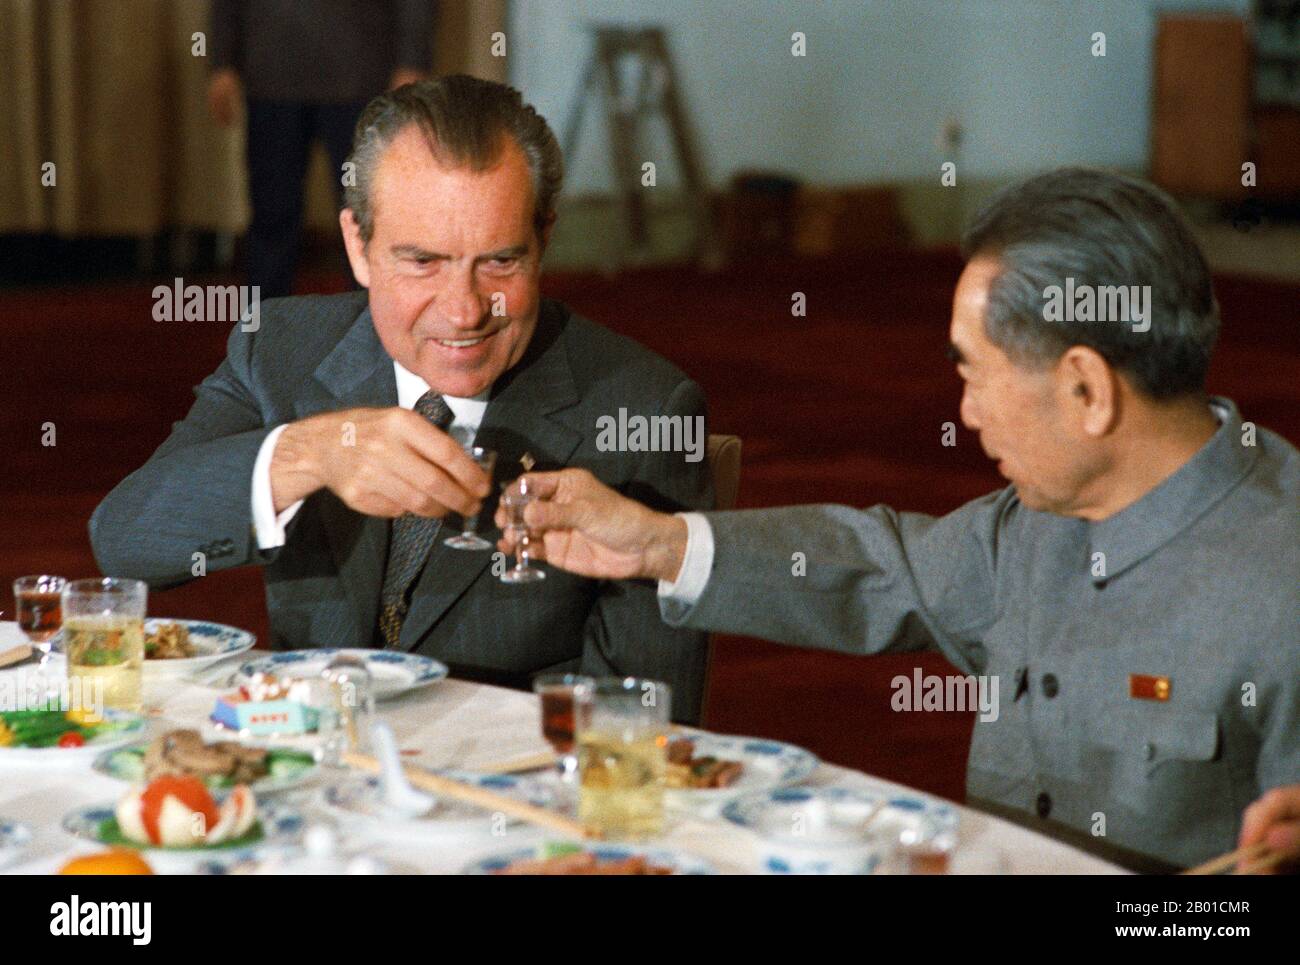 China/USA: Premier Zhou Enlai (5 March 1898 – 8 January 1976) and President Richard Nixon (9 January 1913 - 22 April 1994) toast each other, 25 February 1972.  President Richard Nixon's 1972 visit to China was an important step in formally normalising relations between the United States and the People's Republic of China.  Between February 21-28, Richard Nixon traveled to Beijing, Hangzhou and Shanghai. Almost as soon as the American president arrived in the Chinese capital he was summoned for a quick meeting with Chairman Mao, his sole meeting with China's top leader during the trip. Stock Photo